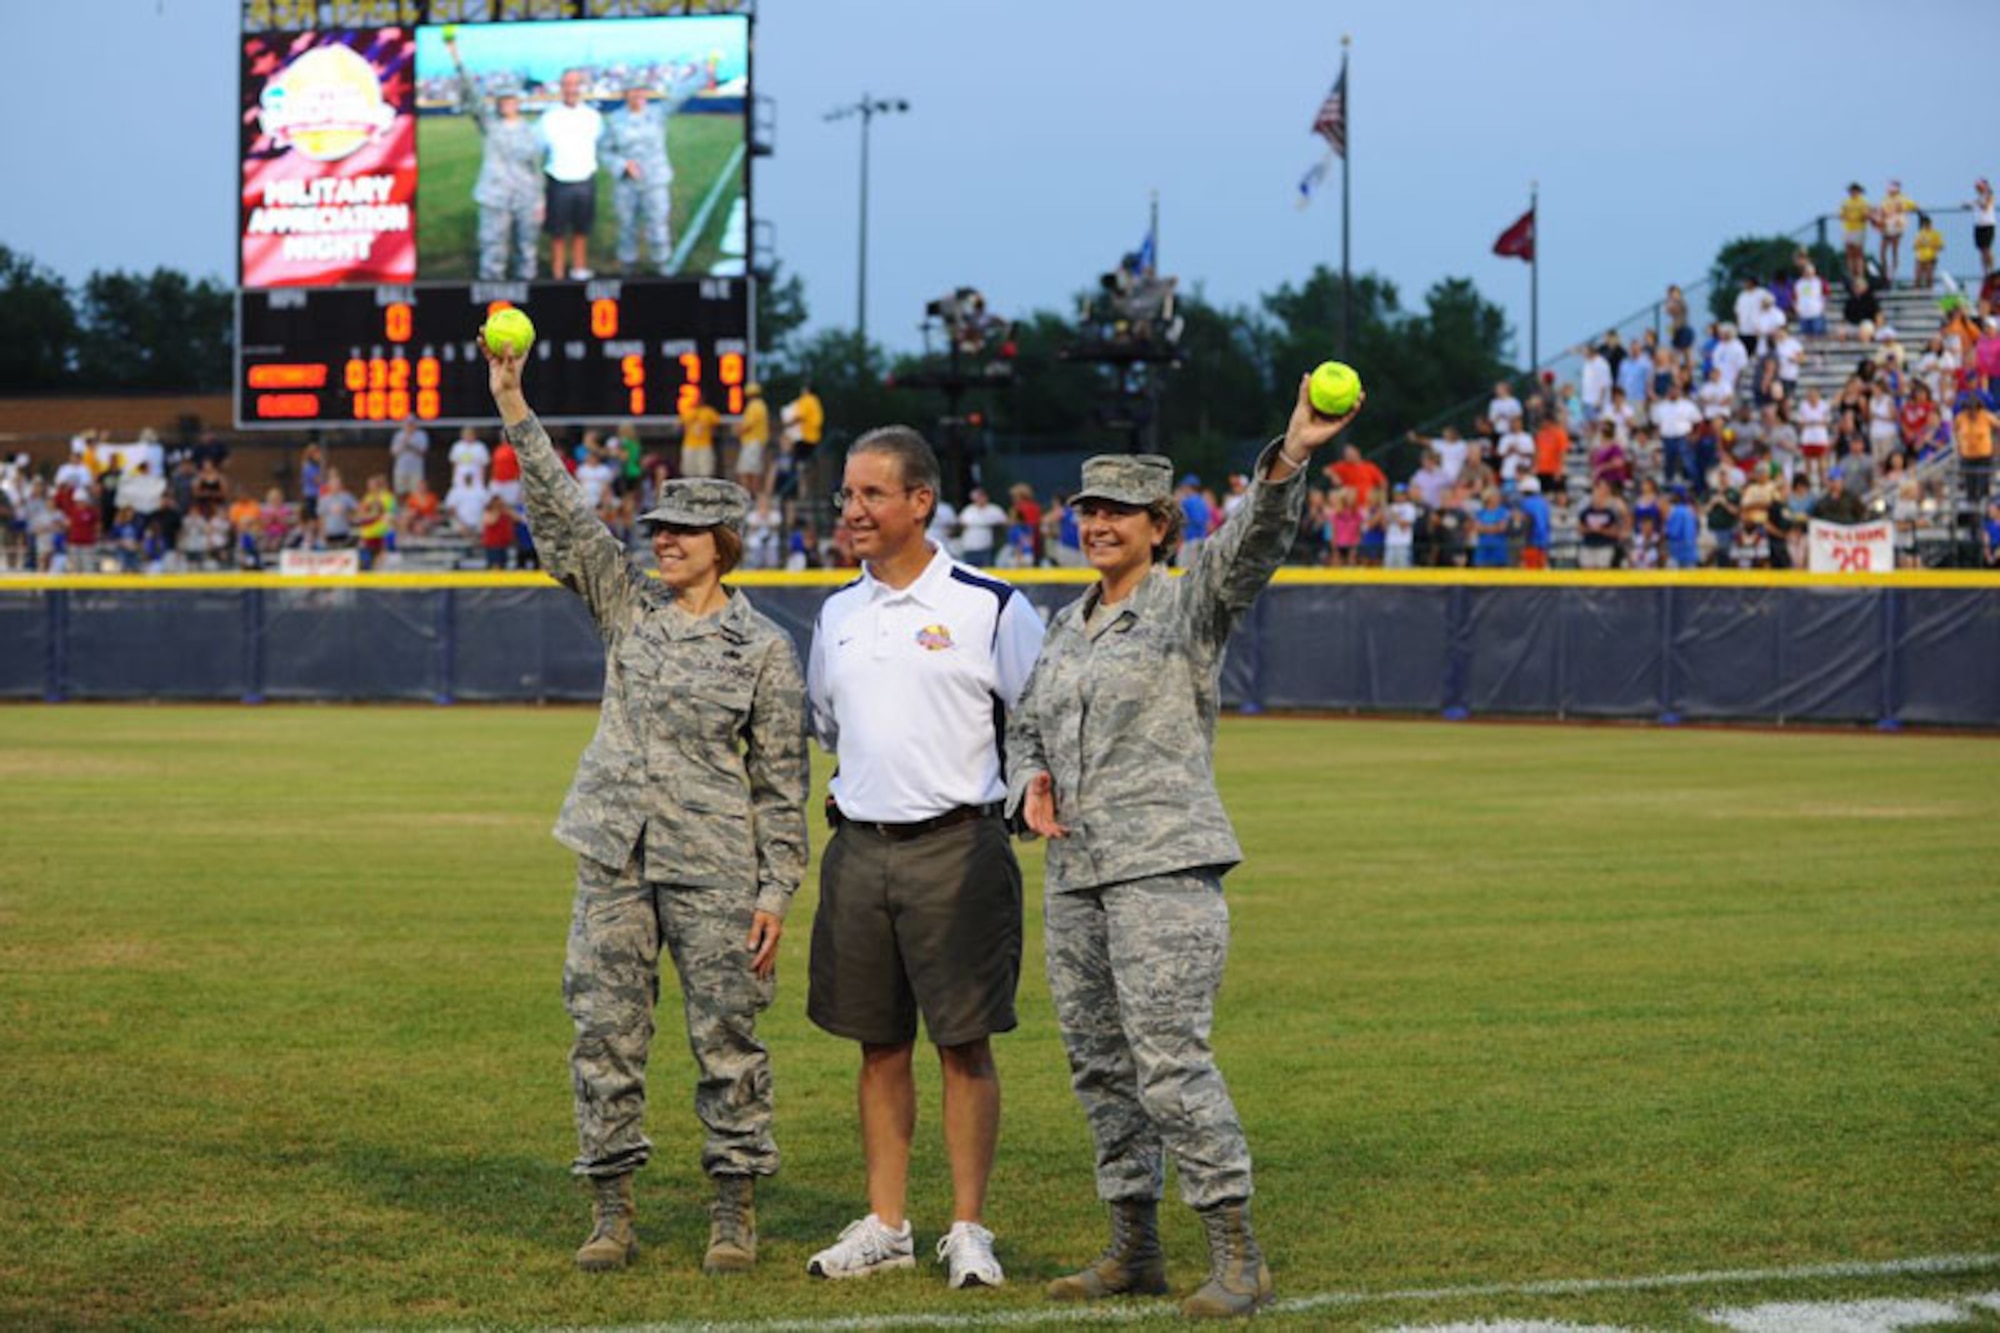 A military appreciation night featuring members of the Air Force Reserve and 507th Air Refueling Wing were held recently during the national women’s softball championship games held in Oklahoma City.  The NCAA recognized two of the highest ranking female leaders serving at Tinker Air Force Base in Oklahoma City, Colonel Marcia Walker, Senior Individual Mobilization Augmentee to the Director, Aerospace Sustainment Directorate, Oklahoma City Air Logistics Center, and Chief Master Sergeant Tina Long, Command Chief Master Sergeant, 507th Air Refueling Wing.  The presentation was made by Scott Farmer, Athletics Director at the University of Louisiana at Lafayette and Chair of the NCAA Division I Softball Committee.